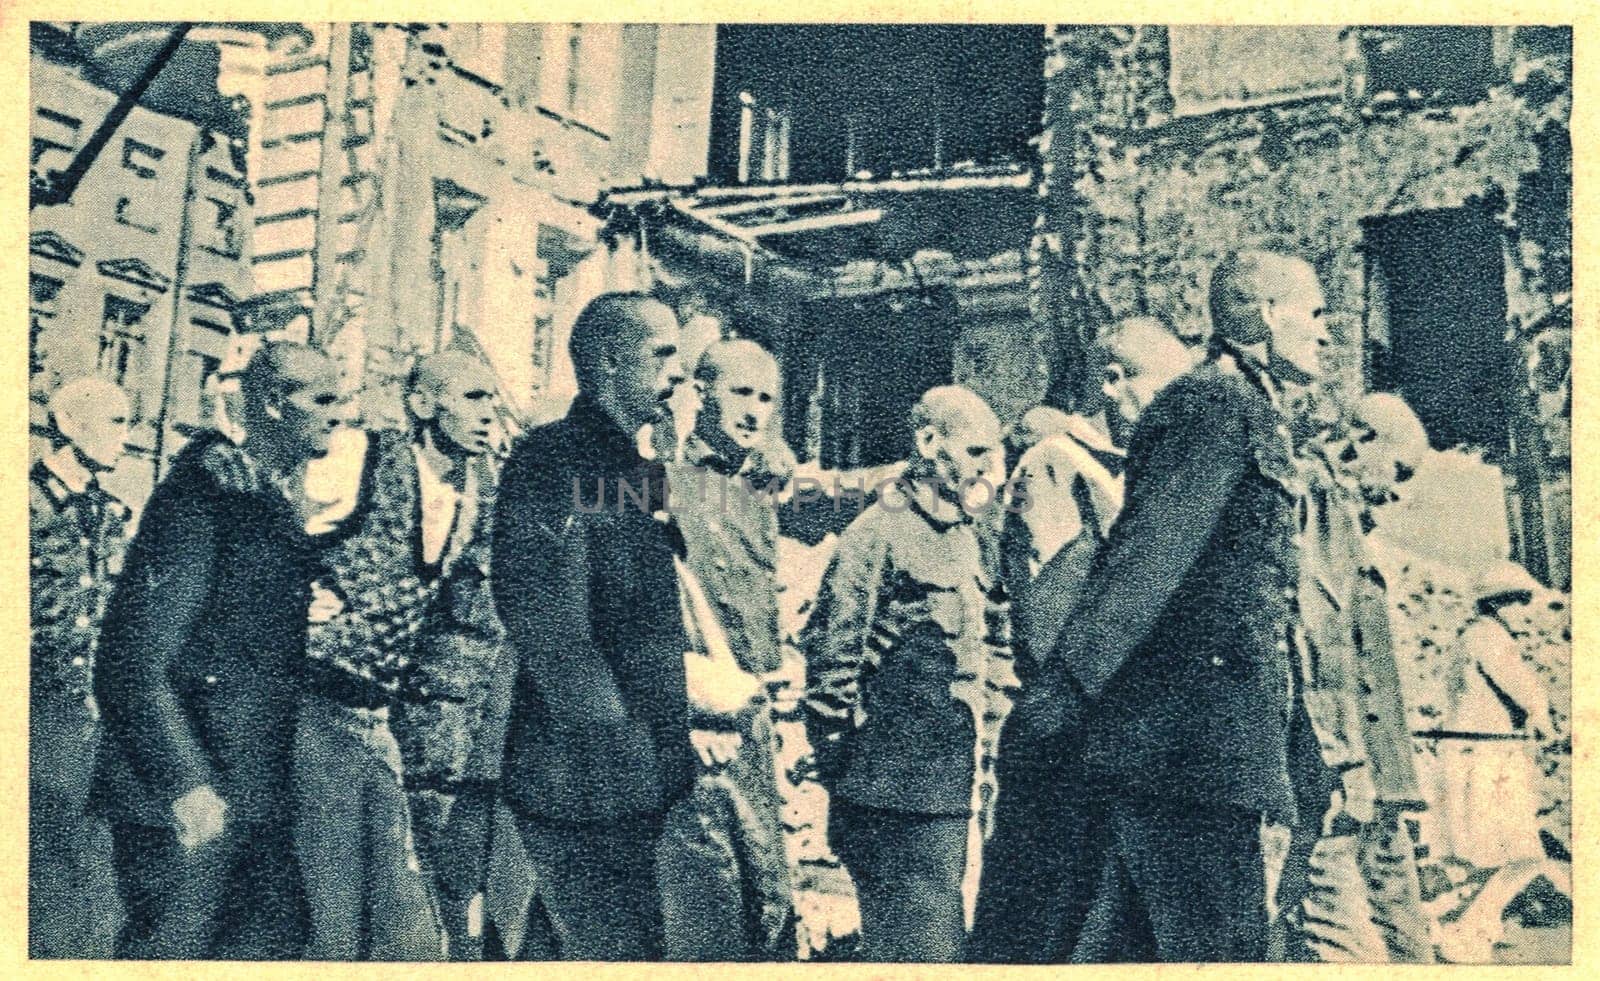 LENINGRAD - 1944: The siege of Leningrad was a prolonged military blockade undertaken from the south by the Army Group North of Nazi Germany against the Soviet city of Leningrad (now Saint Petersburg) on the Eastern Front in World War II. In the photo, German war prisoners head shaved go along the street of Leningrad. by roman_nerud